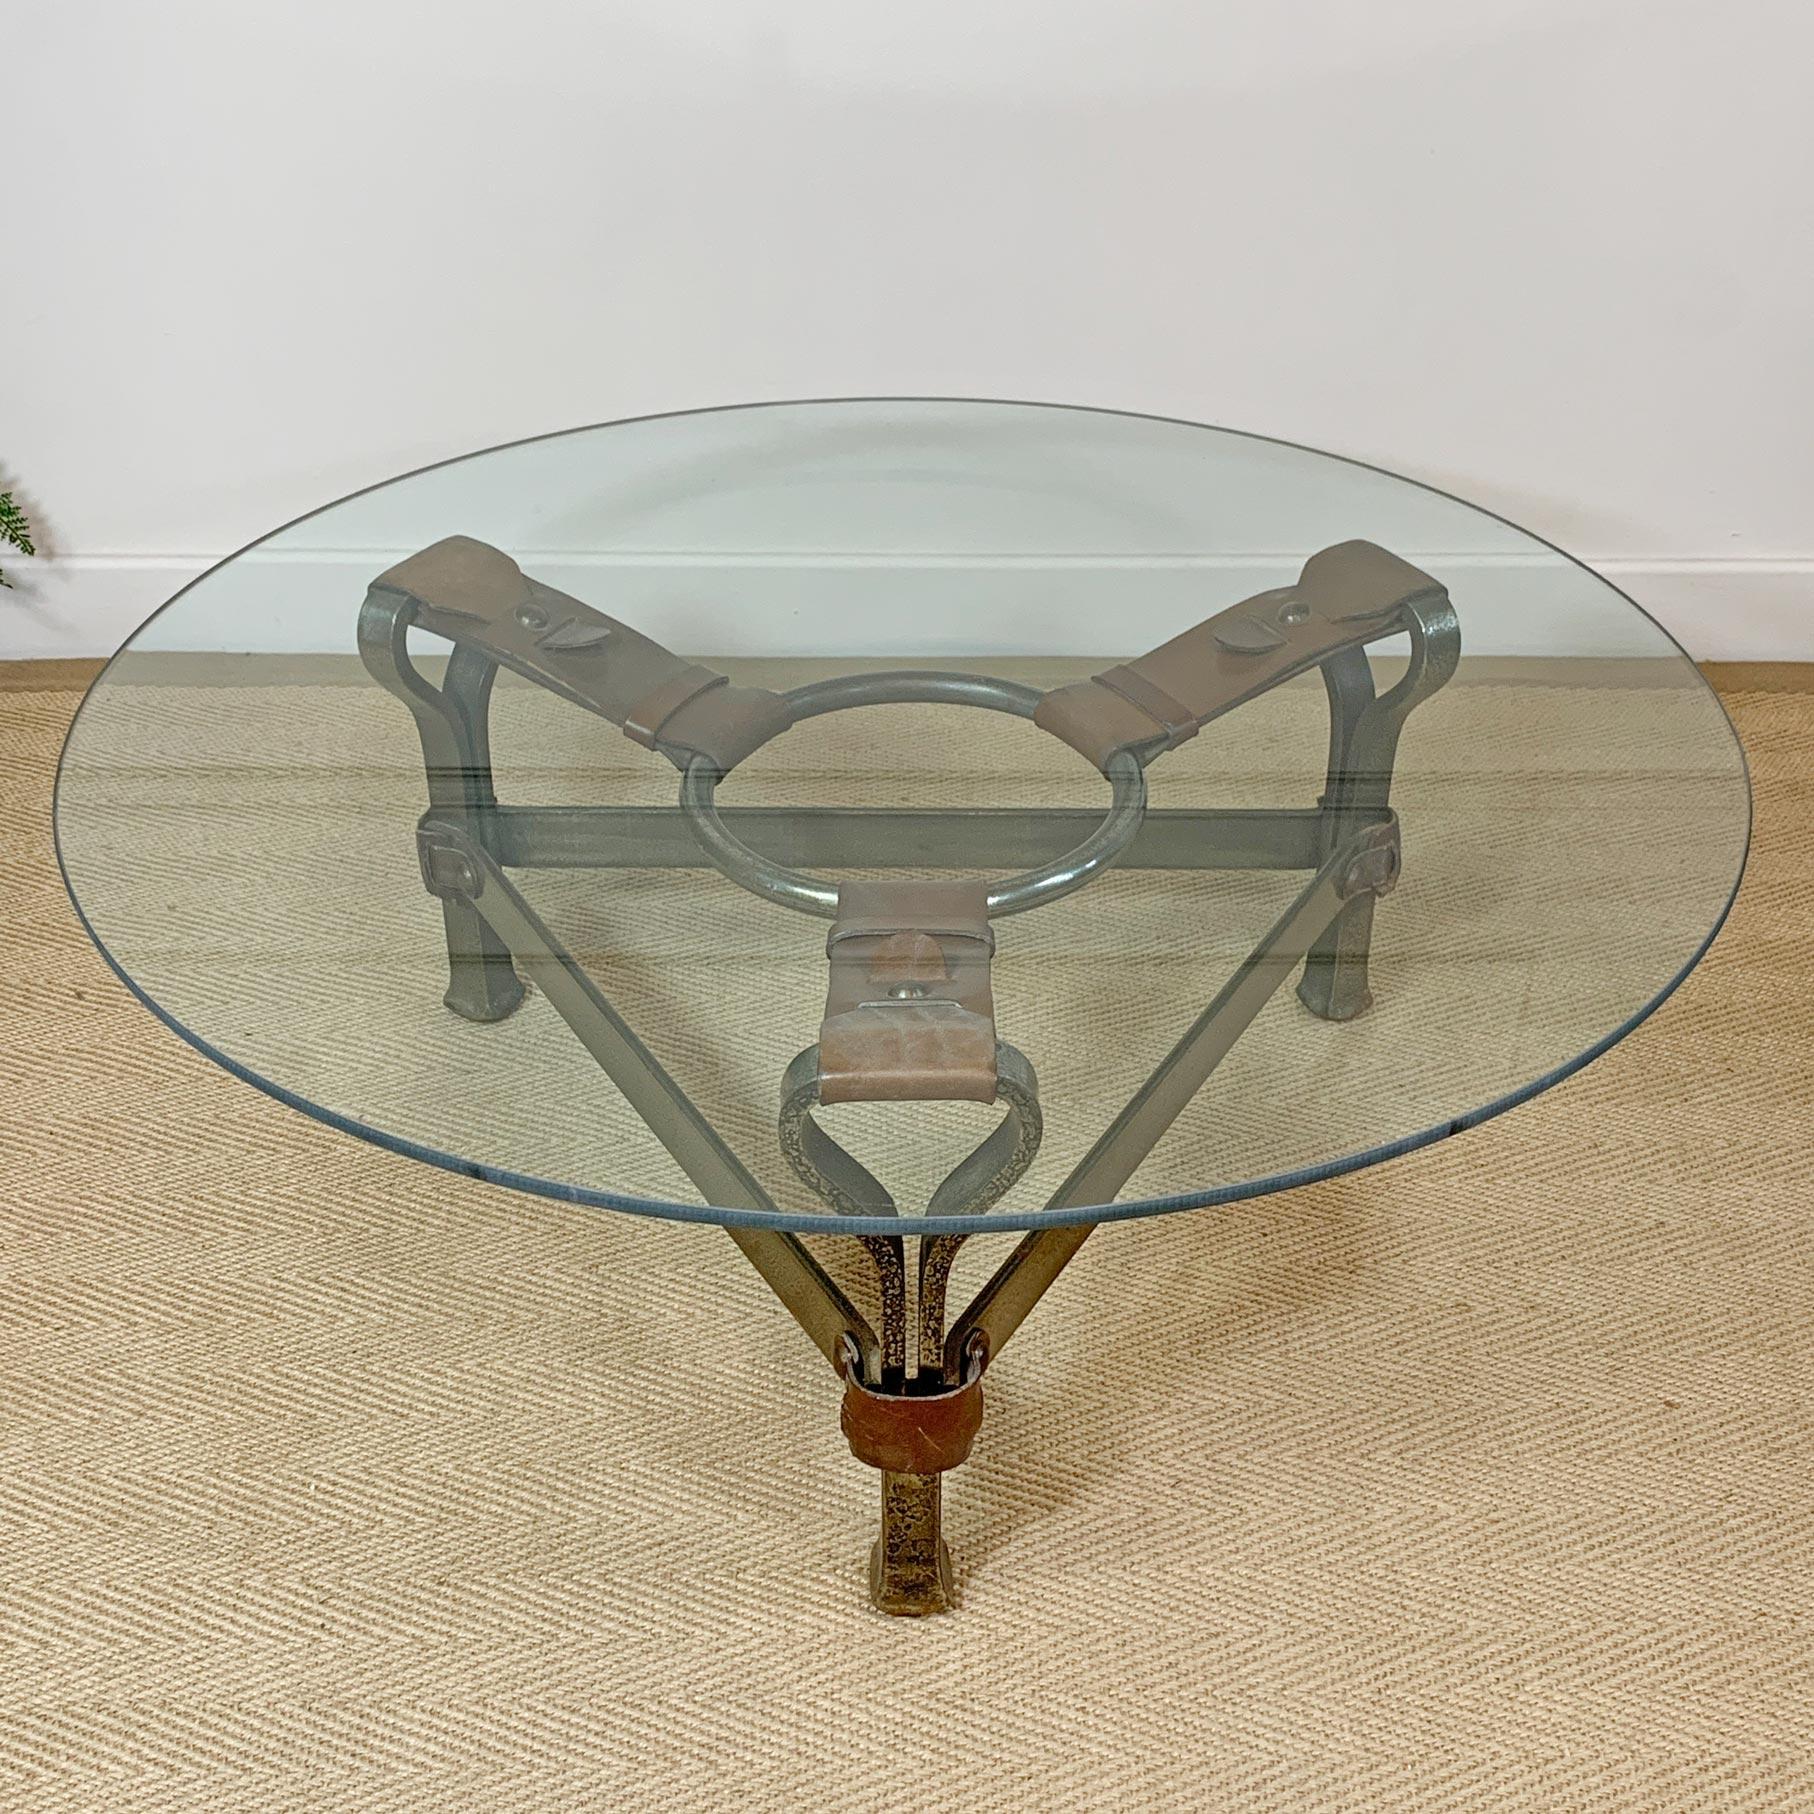 Jean-Pierre Ryckaert Tan Leather Strap and Steel Coffee Table For Sale 5